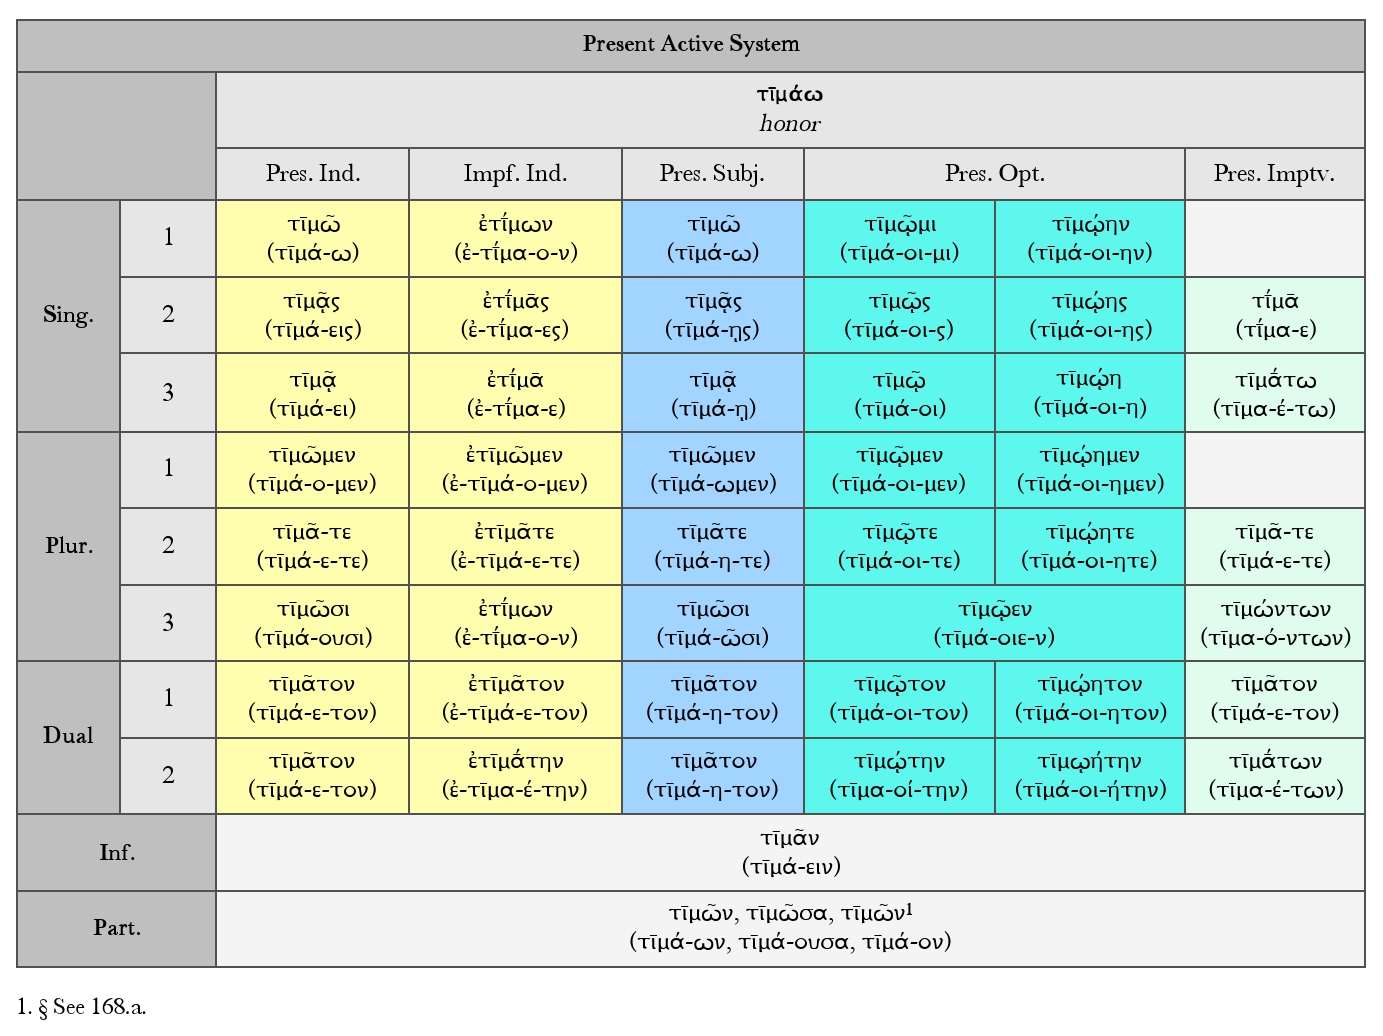 Goodell: Present Active System Paradigm Chart for τῑμάω